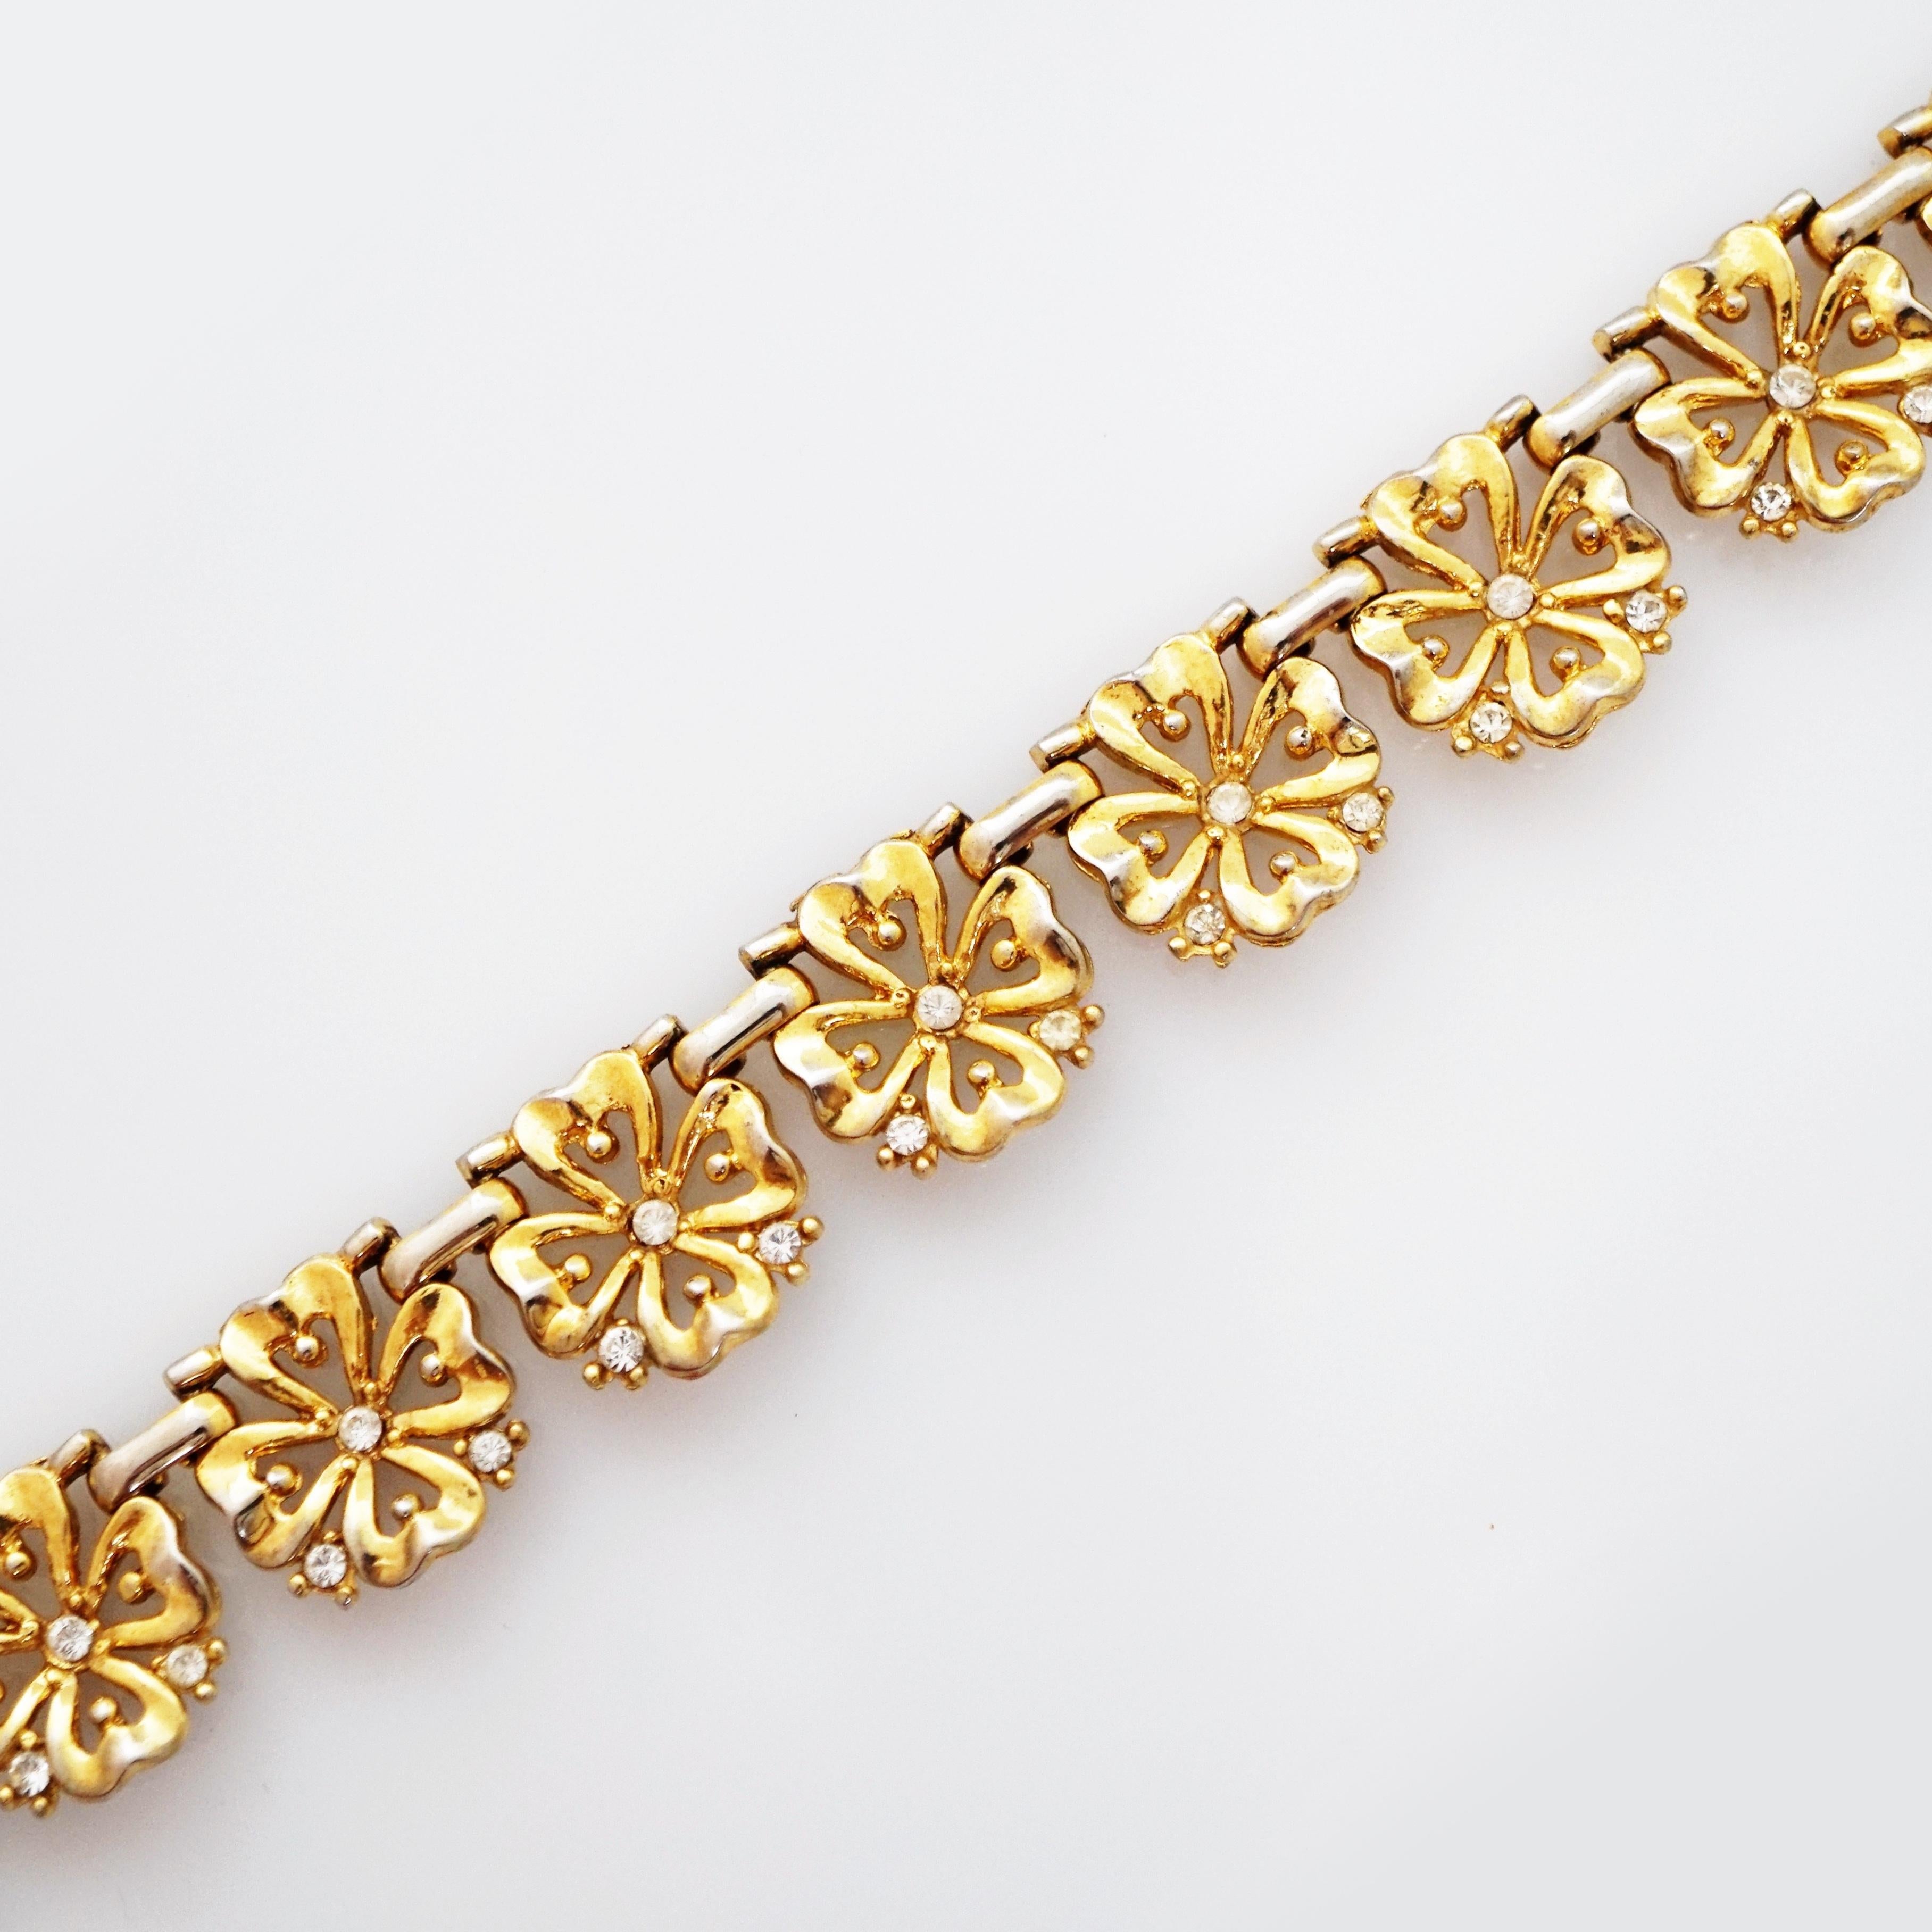 Modern Gold Four Leaf Clover Choker Necklace By Alfred Philippe For Crown Trifari, 1949